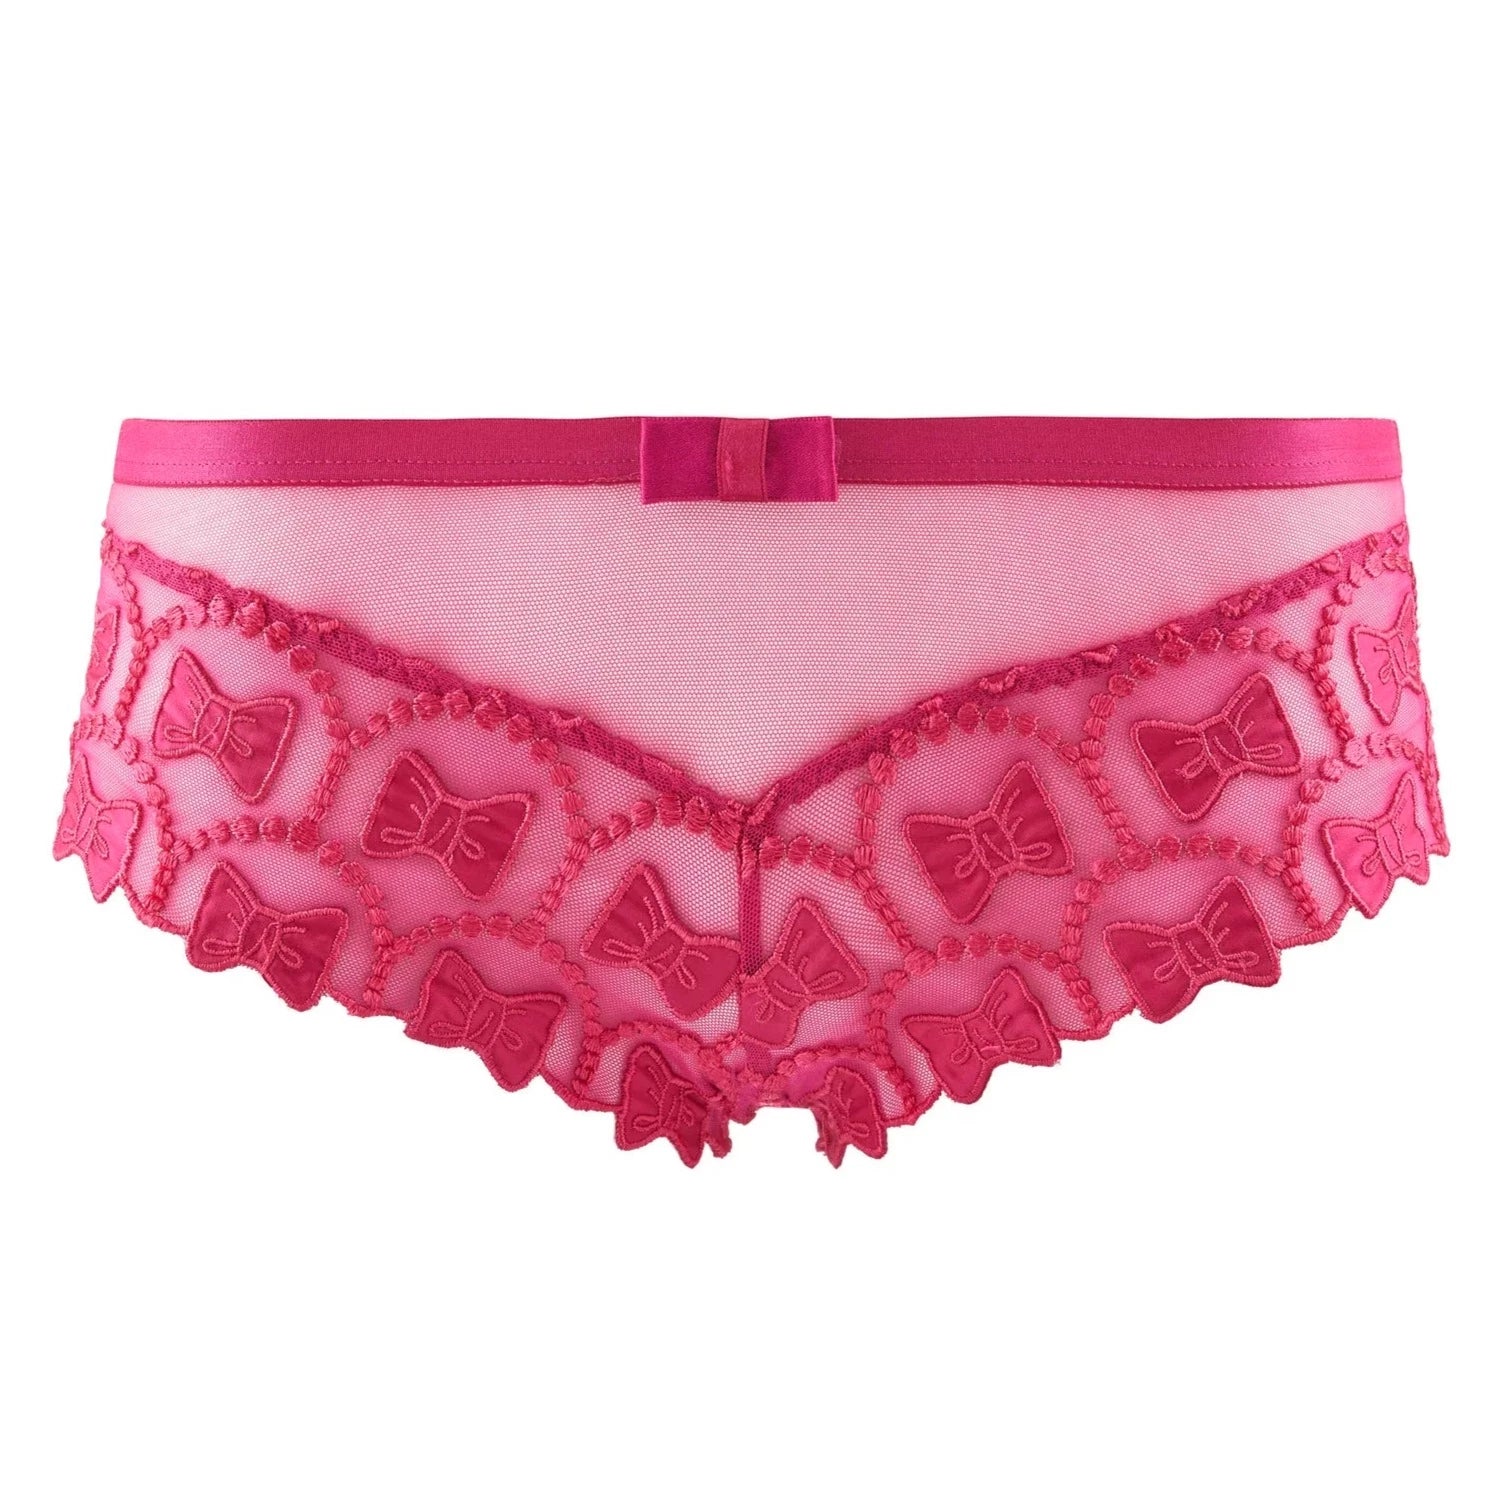 Aubade, VIKTOR&ROLF THE BOW COLLECTION SHORTY | PINK - Bellizima